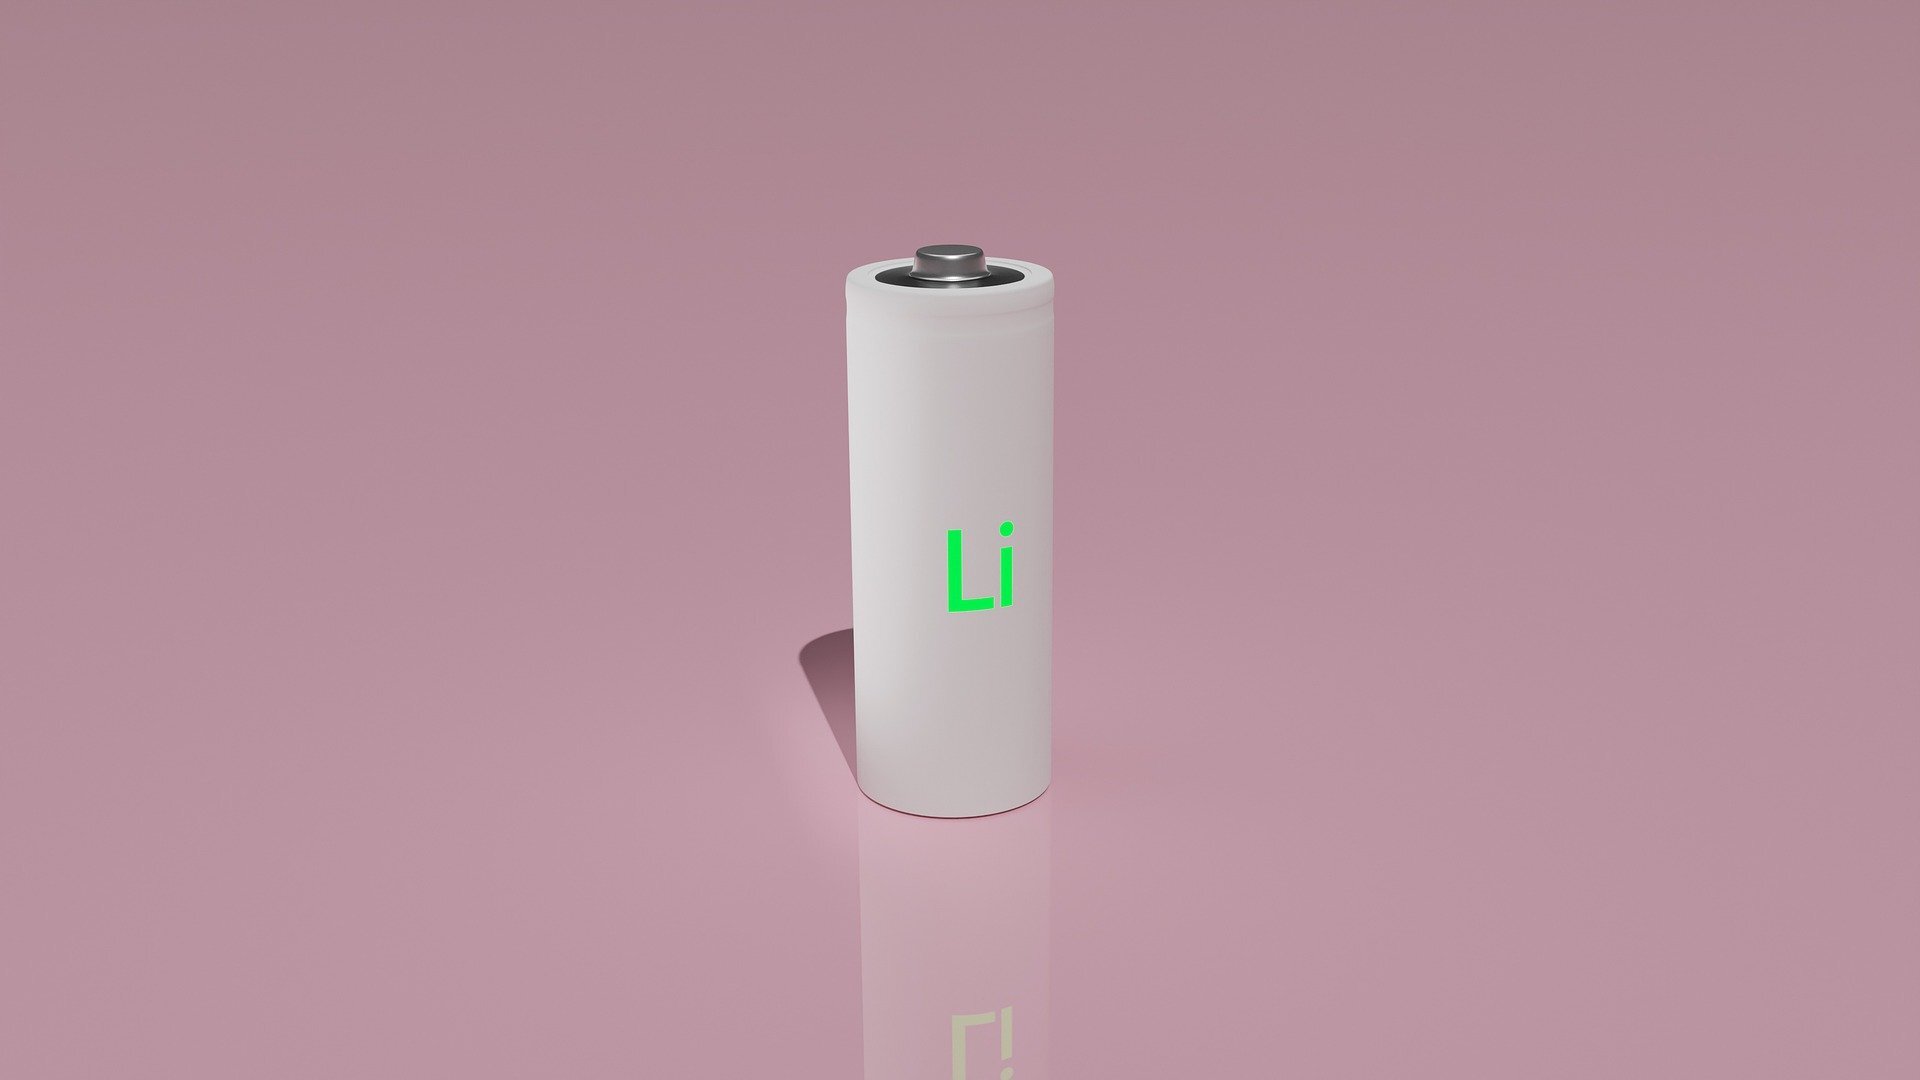 A strategy to create highly performing cobalt-free cathodes for lithium-ion batteries